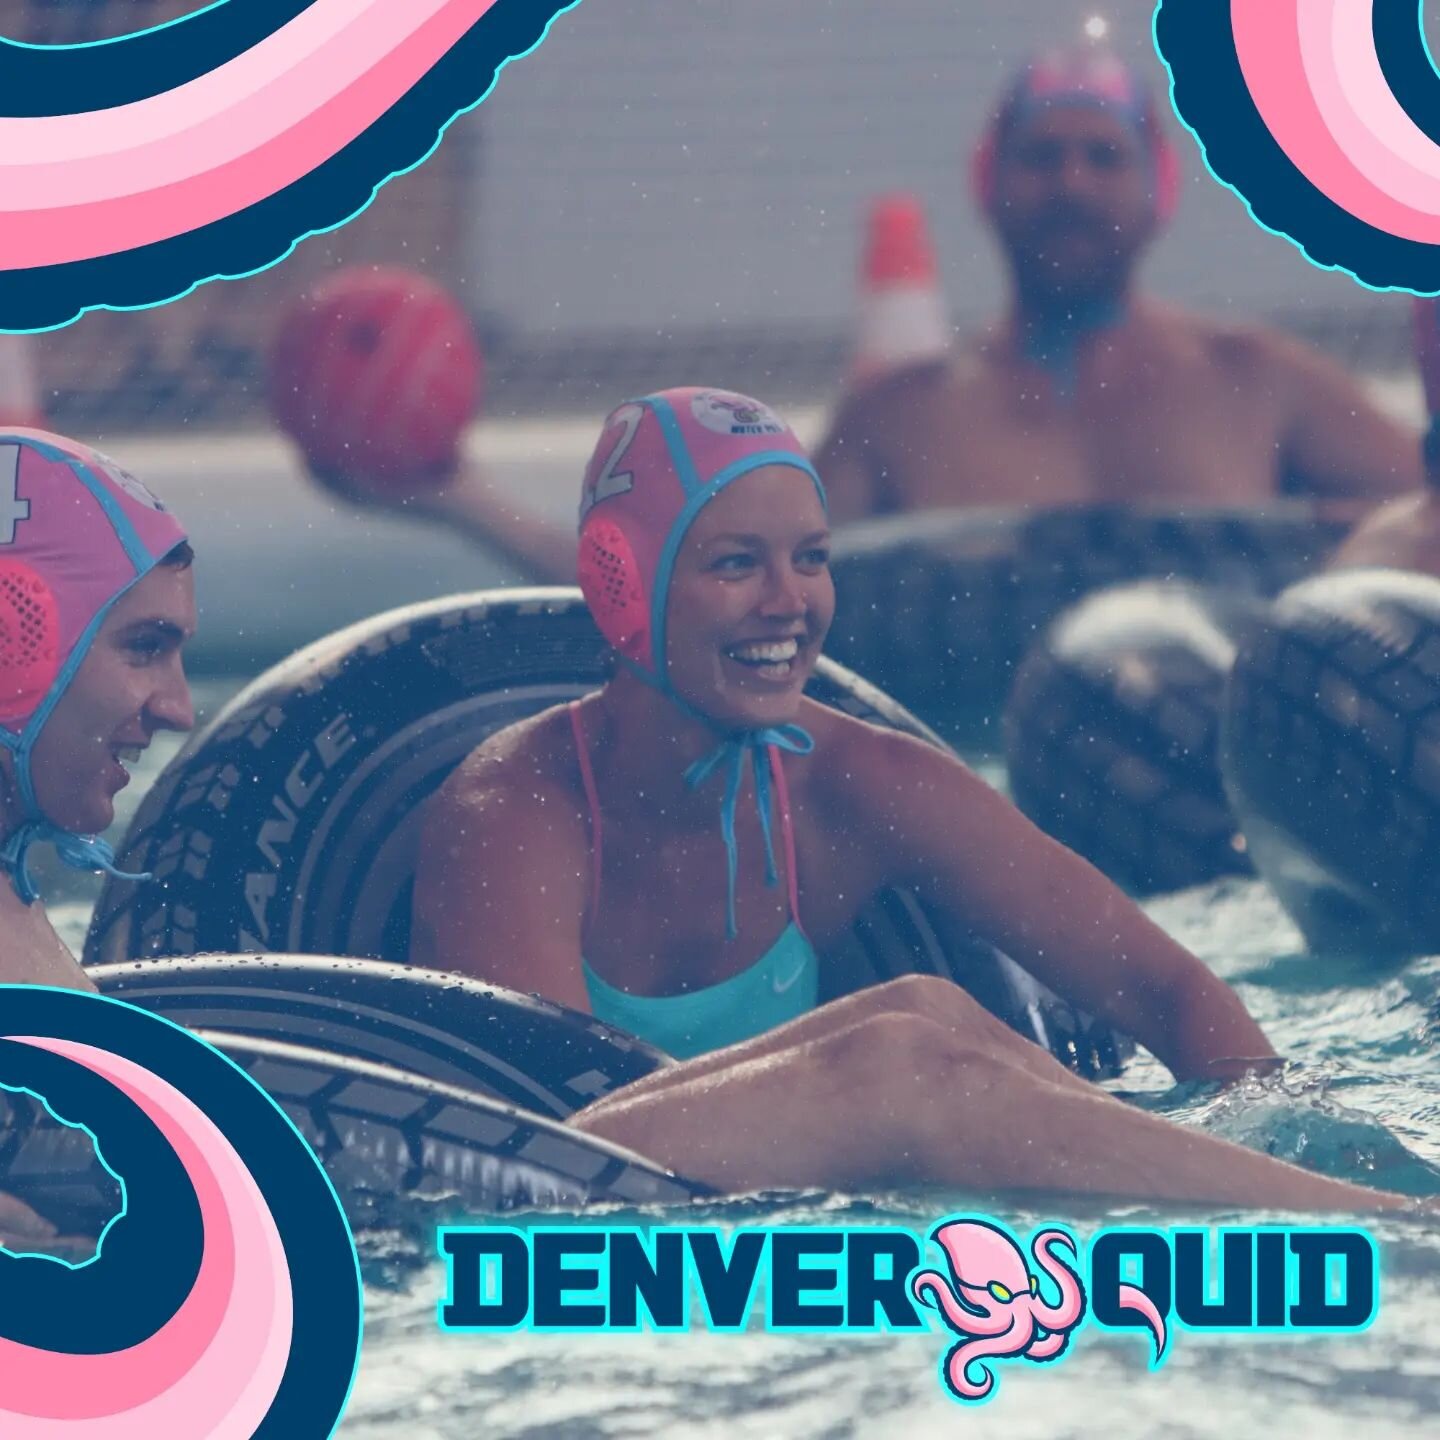 Squid has always been more than a team! All our members are family or what we like to call a 'Squad' (a group of Squid). 
_
Once a Squid, always a Squid 🦑
_
#inclusivesports #lgbt #diversity #aquatics #waterpolo #swimming  #masters #mastersswimming 